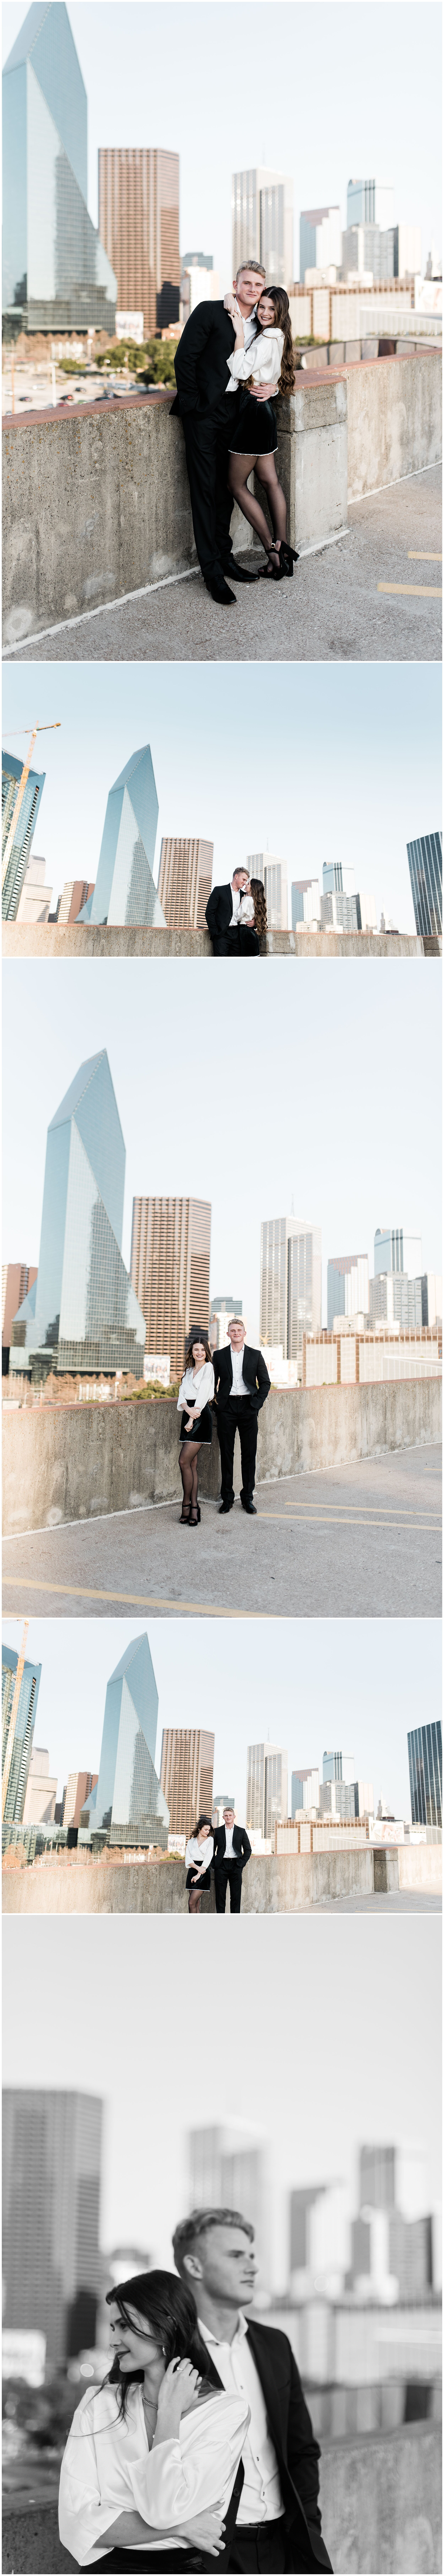  downtown dallas engagement session | lumen room engagement session | www.jordanmitchellphotography.com 